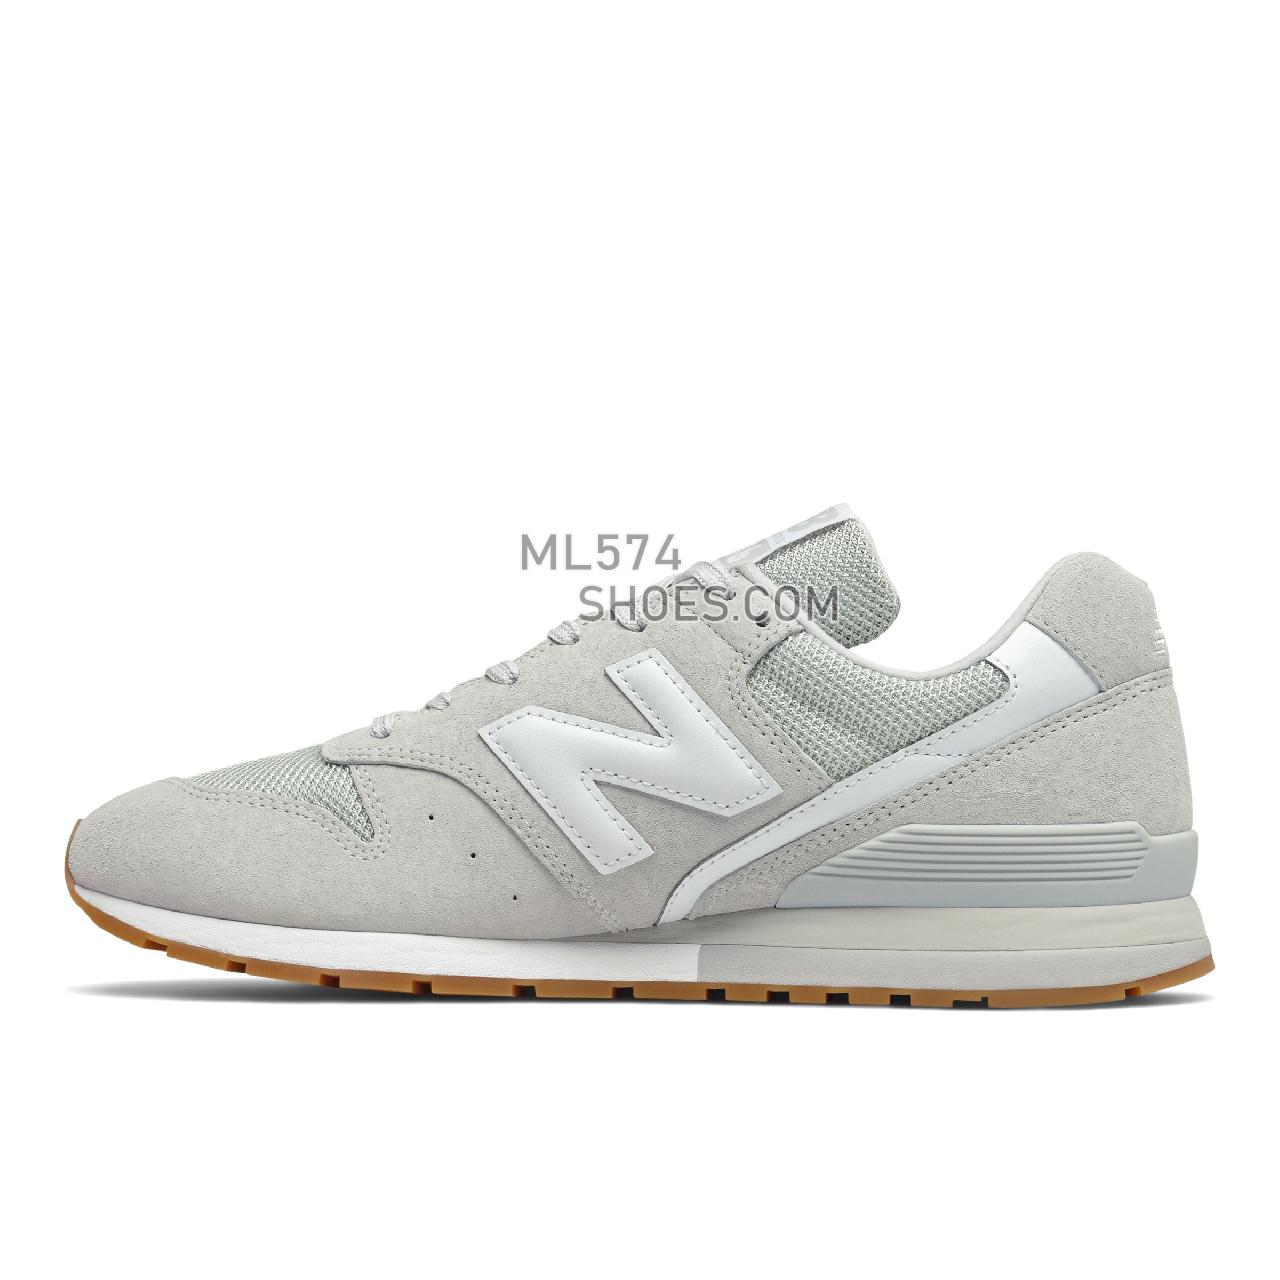 New Balance 996v2 - Men's Classic Sneakers - Summer Fog with White - CM996CPS